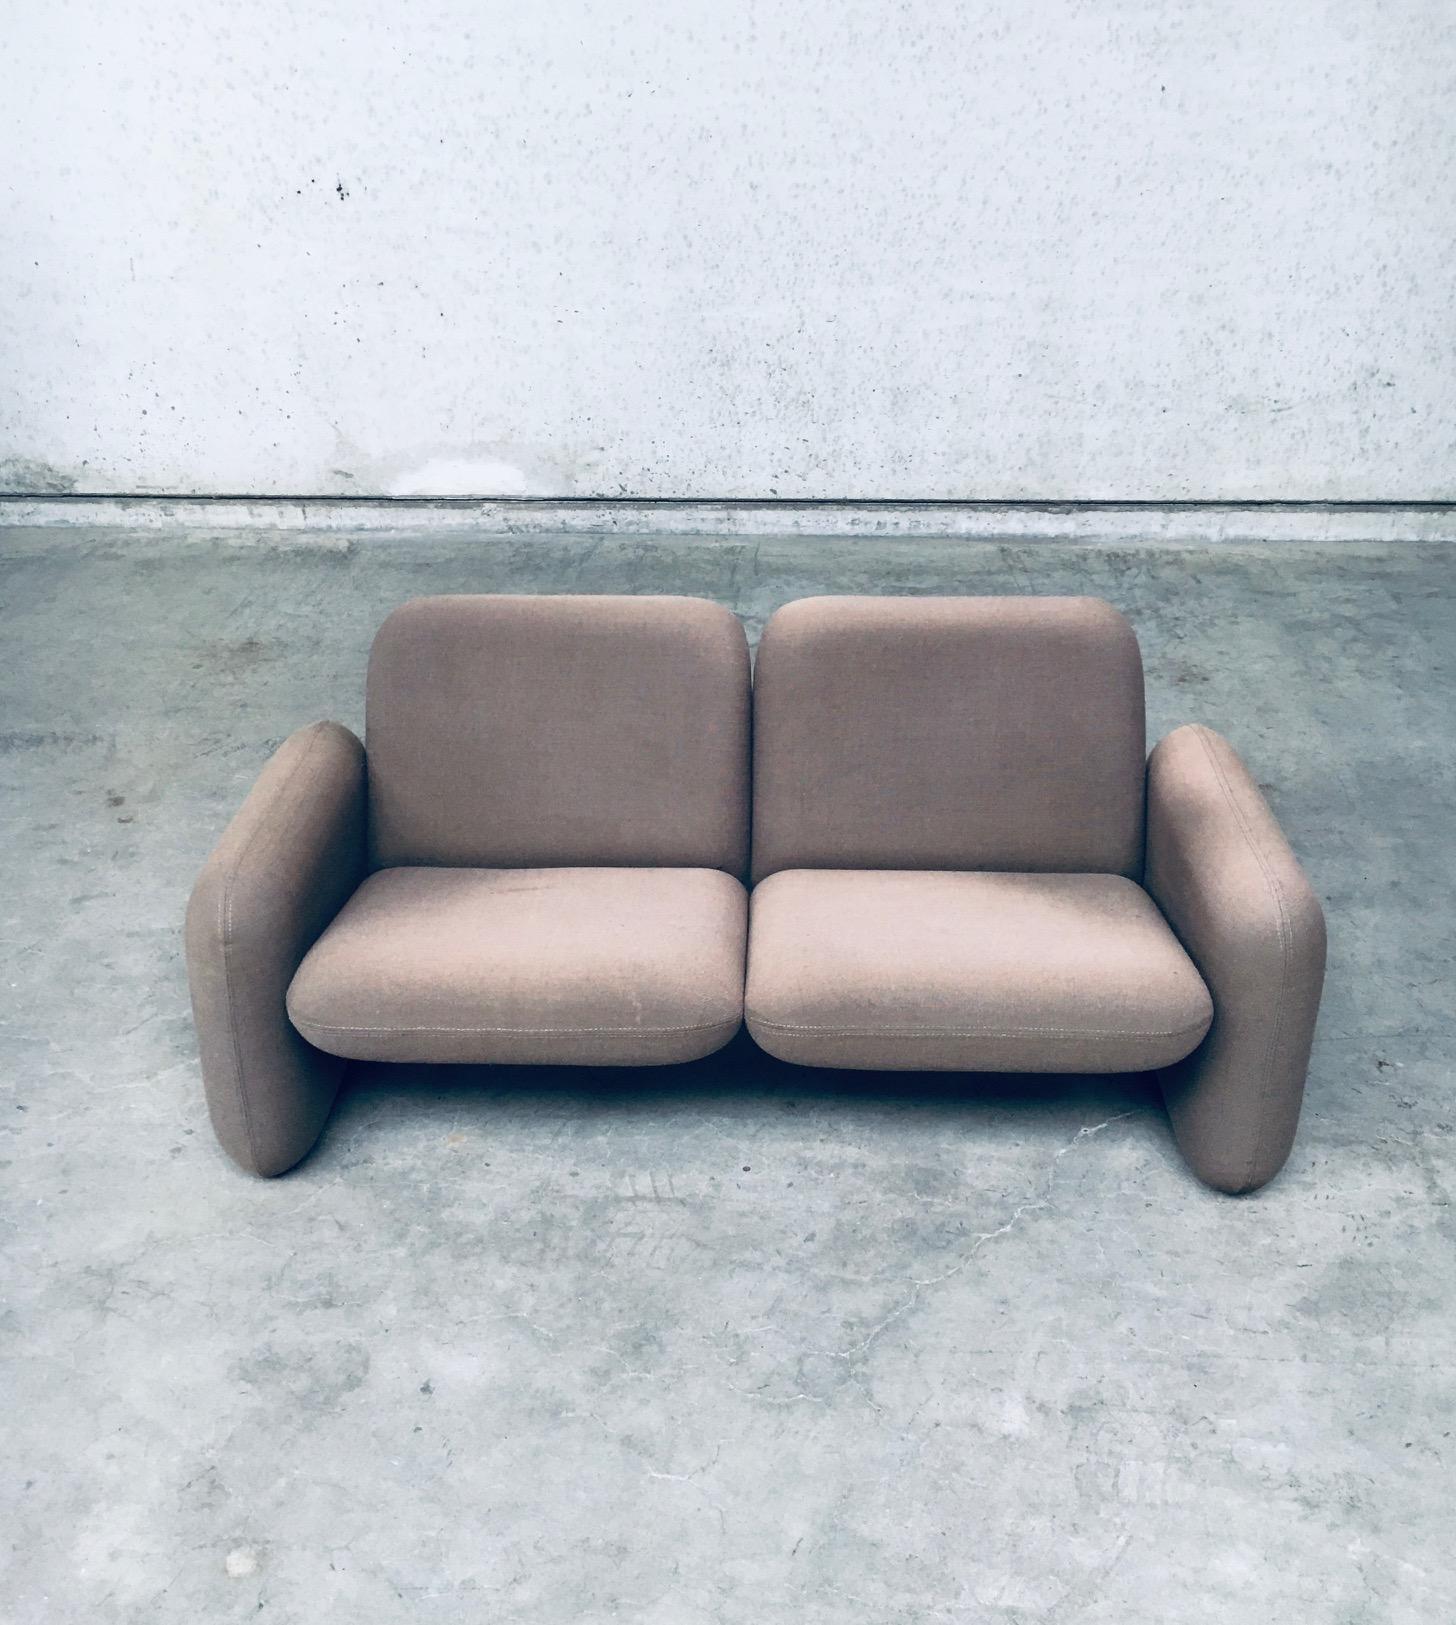 Vintage Iconic 1970s Chiclet Sofa by Ray Wilkes for Herman Miller 1